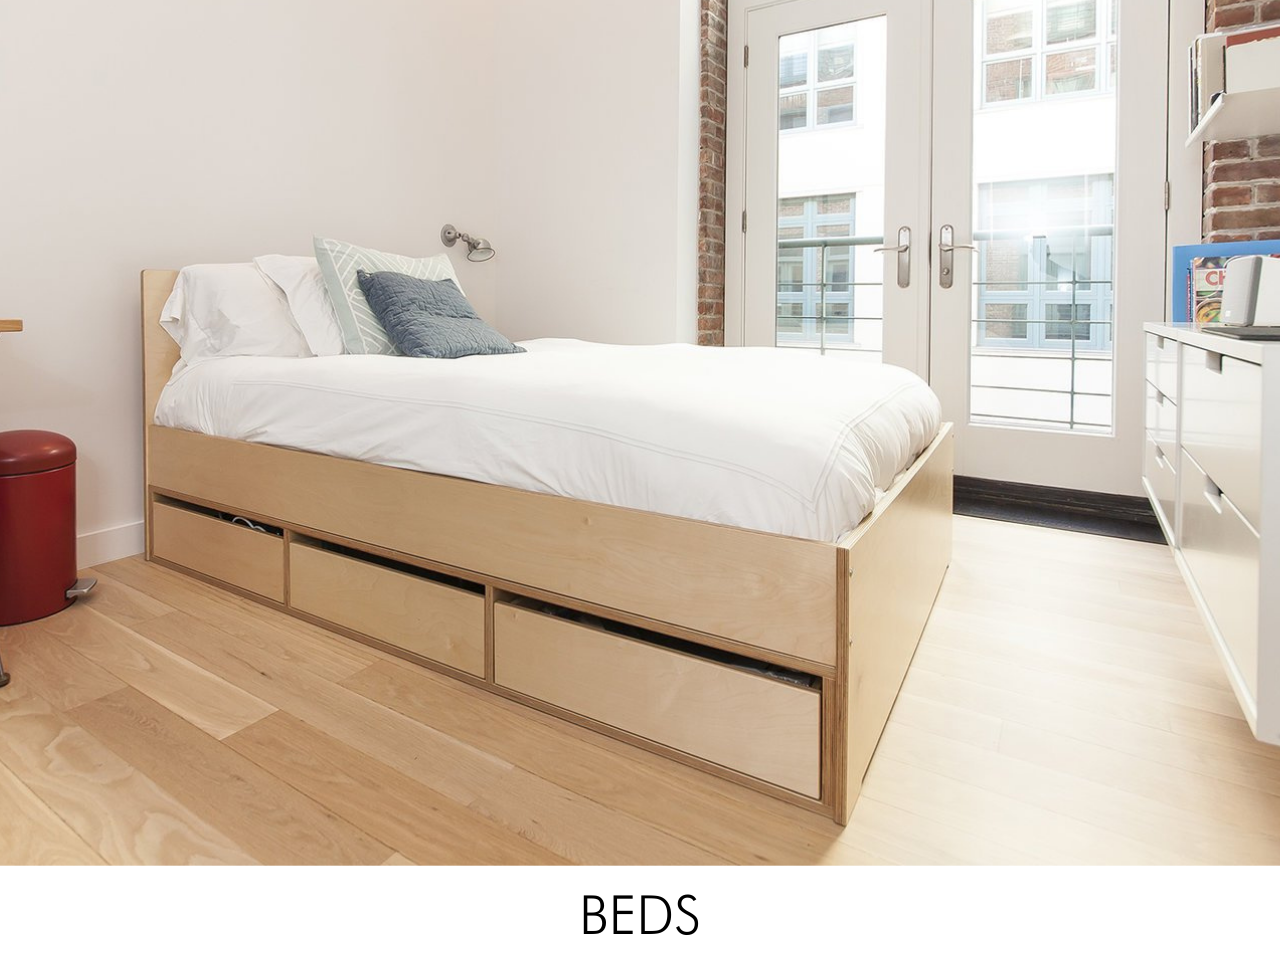 Modern minimalist bedroom with a wooden platform bed, white bedding, and hardwood floor.